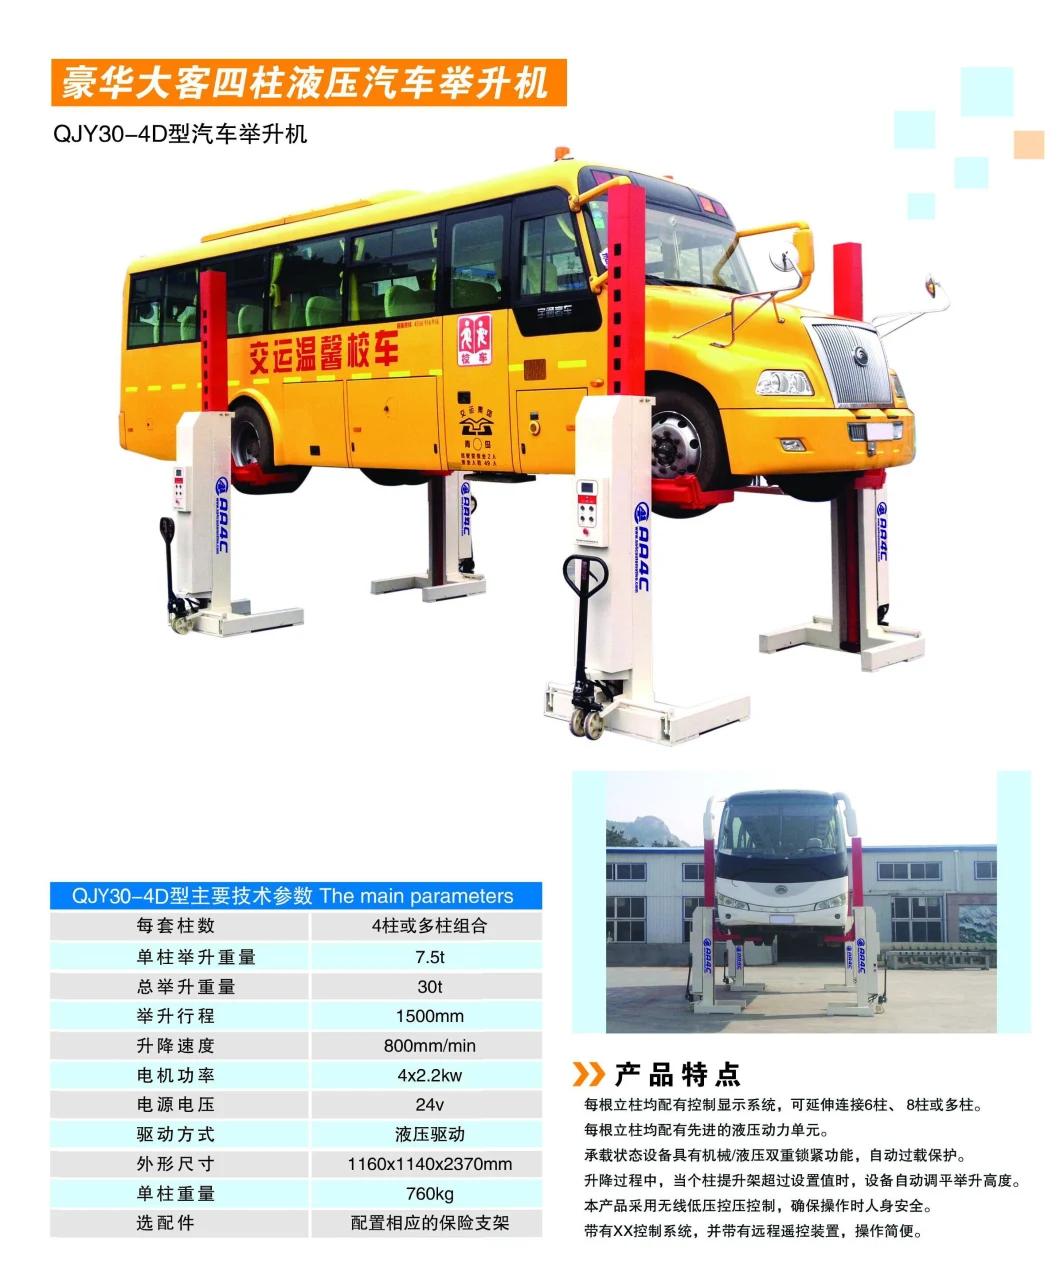 AA4c 22t/ 30t Wireless Mobile Column Bus/Truck Lift Heavy Duty Vehicle Elevator Ramp Imported Balancing Valve